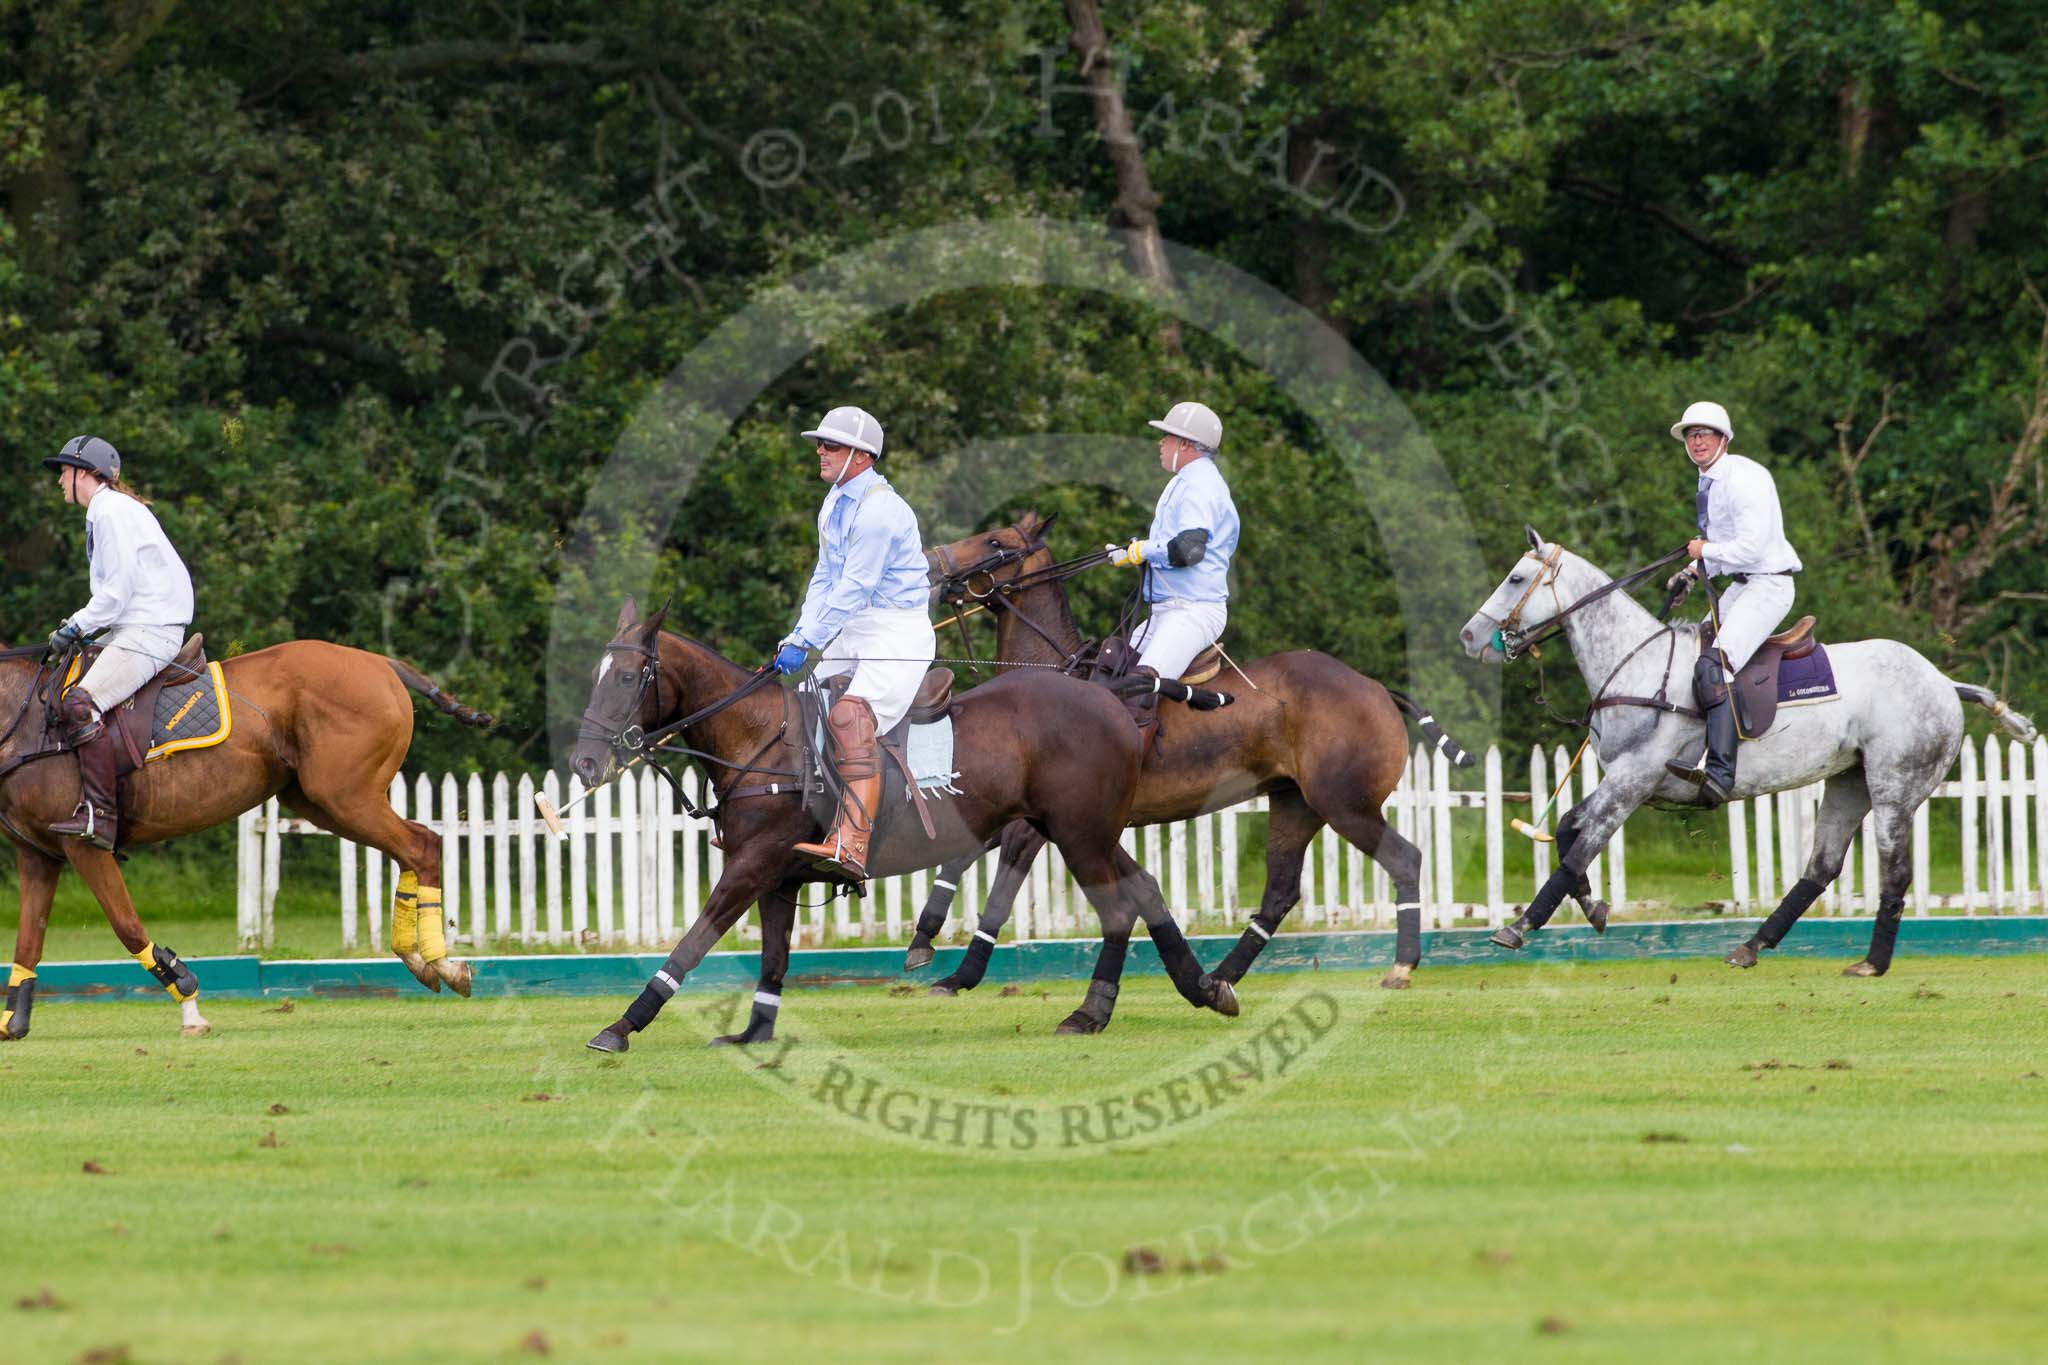 7th Heritage Polo Cup semi-finals: Timothy Rose, La Mariposa Polo Team..
Hurtwood Park Polo Club,
Ewhurst Green,
Surrey,
United Kingdom,
on 04 August 2012 at 15:49, image #286